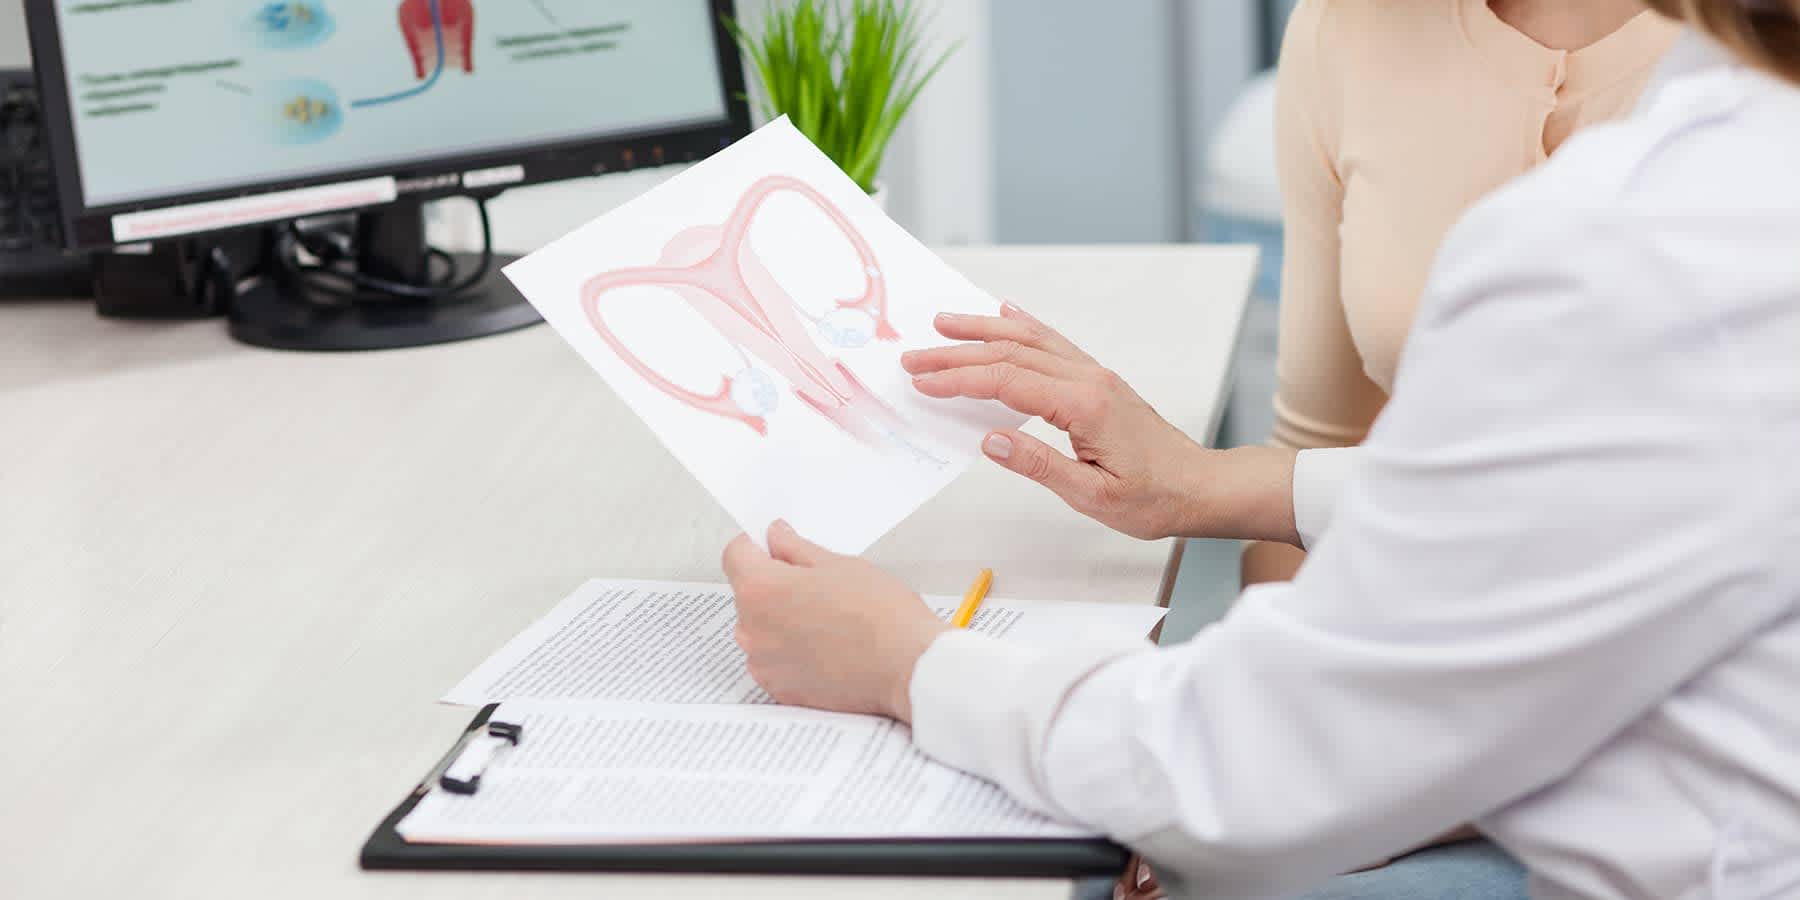 Healthcare provider with diagram of female reproductive system discussing what causes ovarian cysts